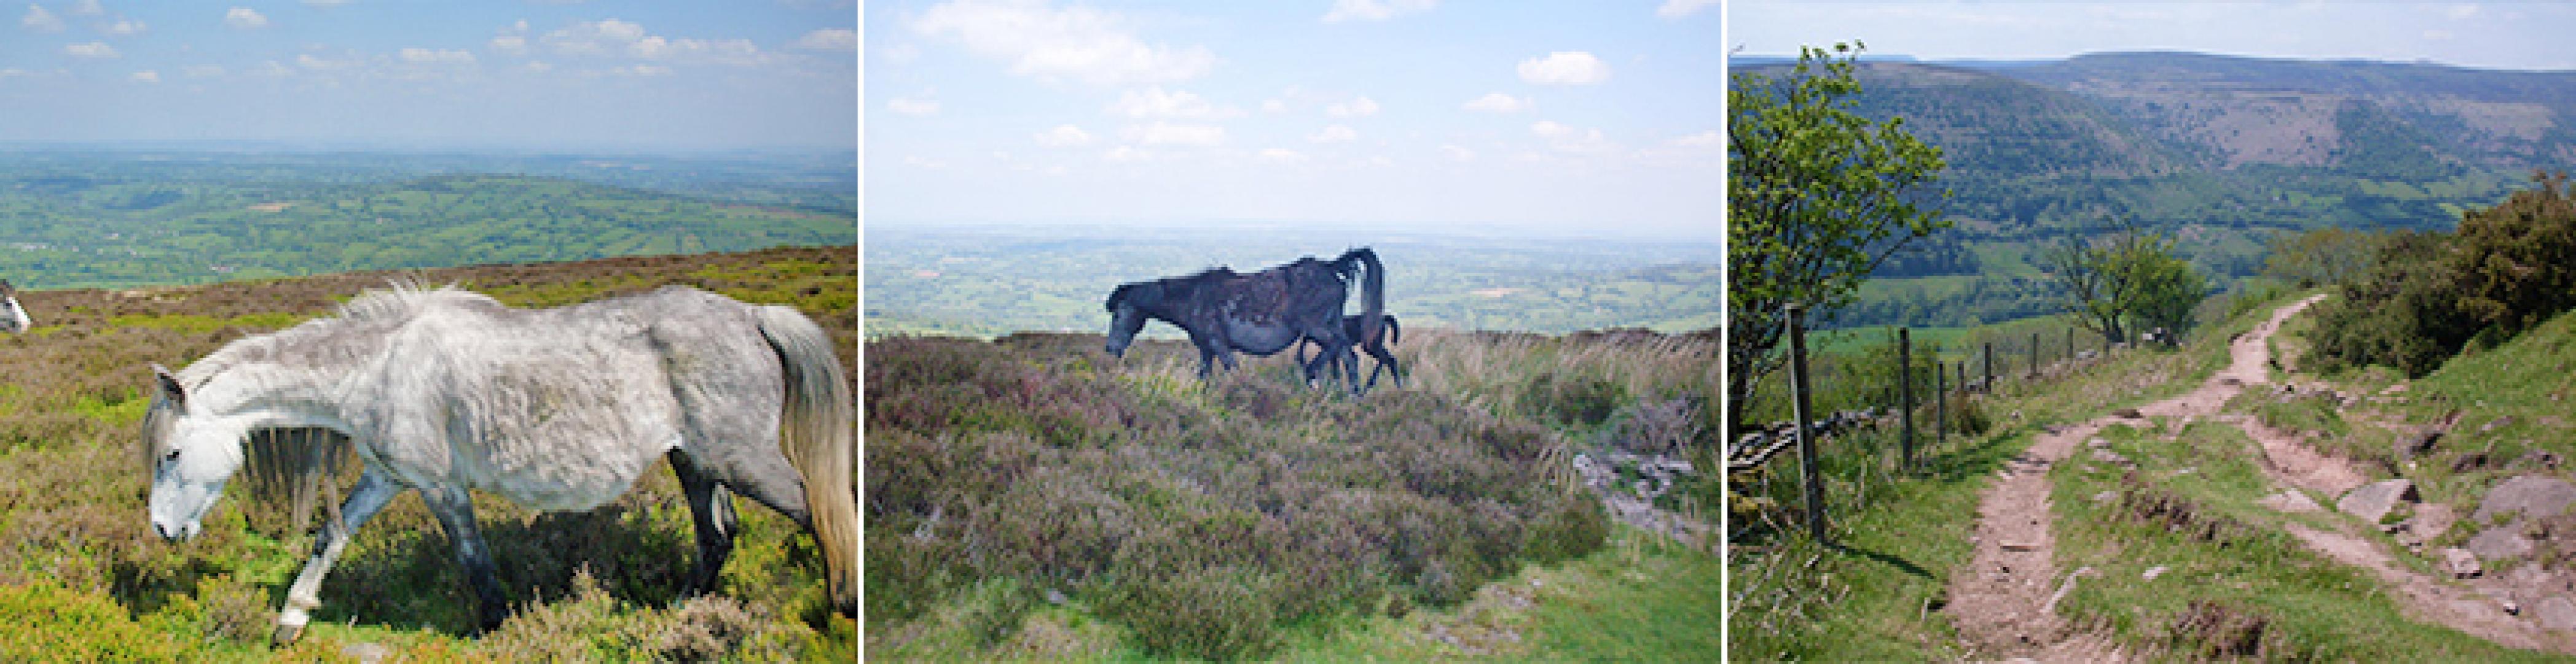 Three images of Offa's Dyke Path: a pony, pony with foal and a sandy, scenic trail